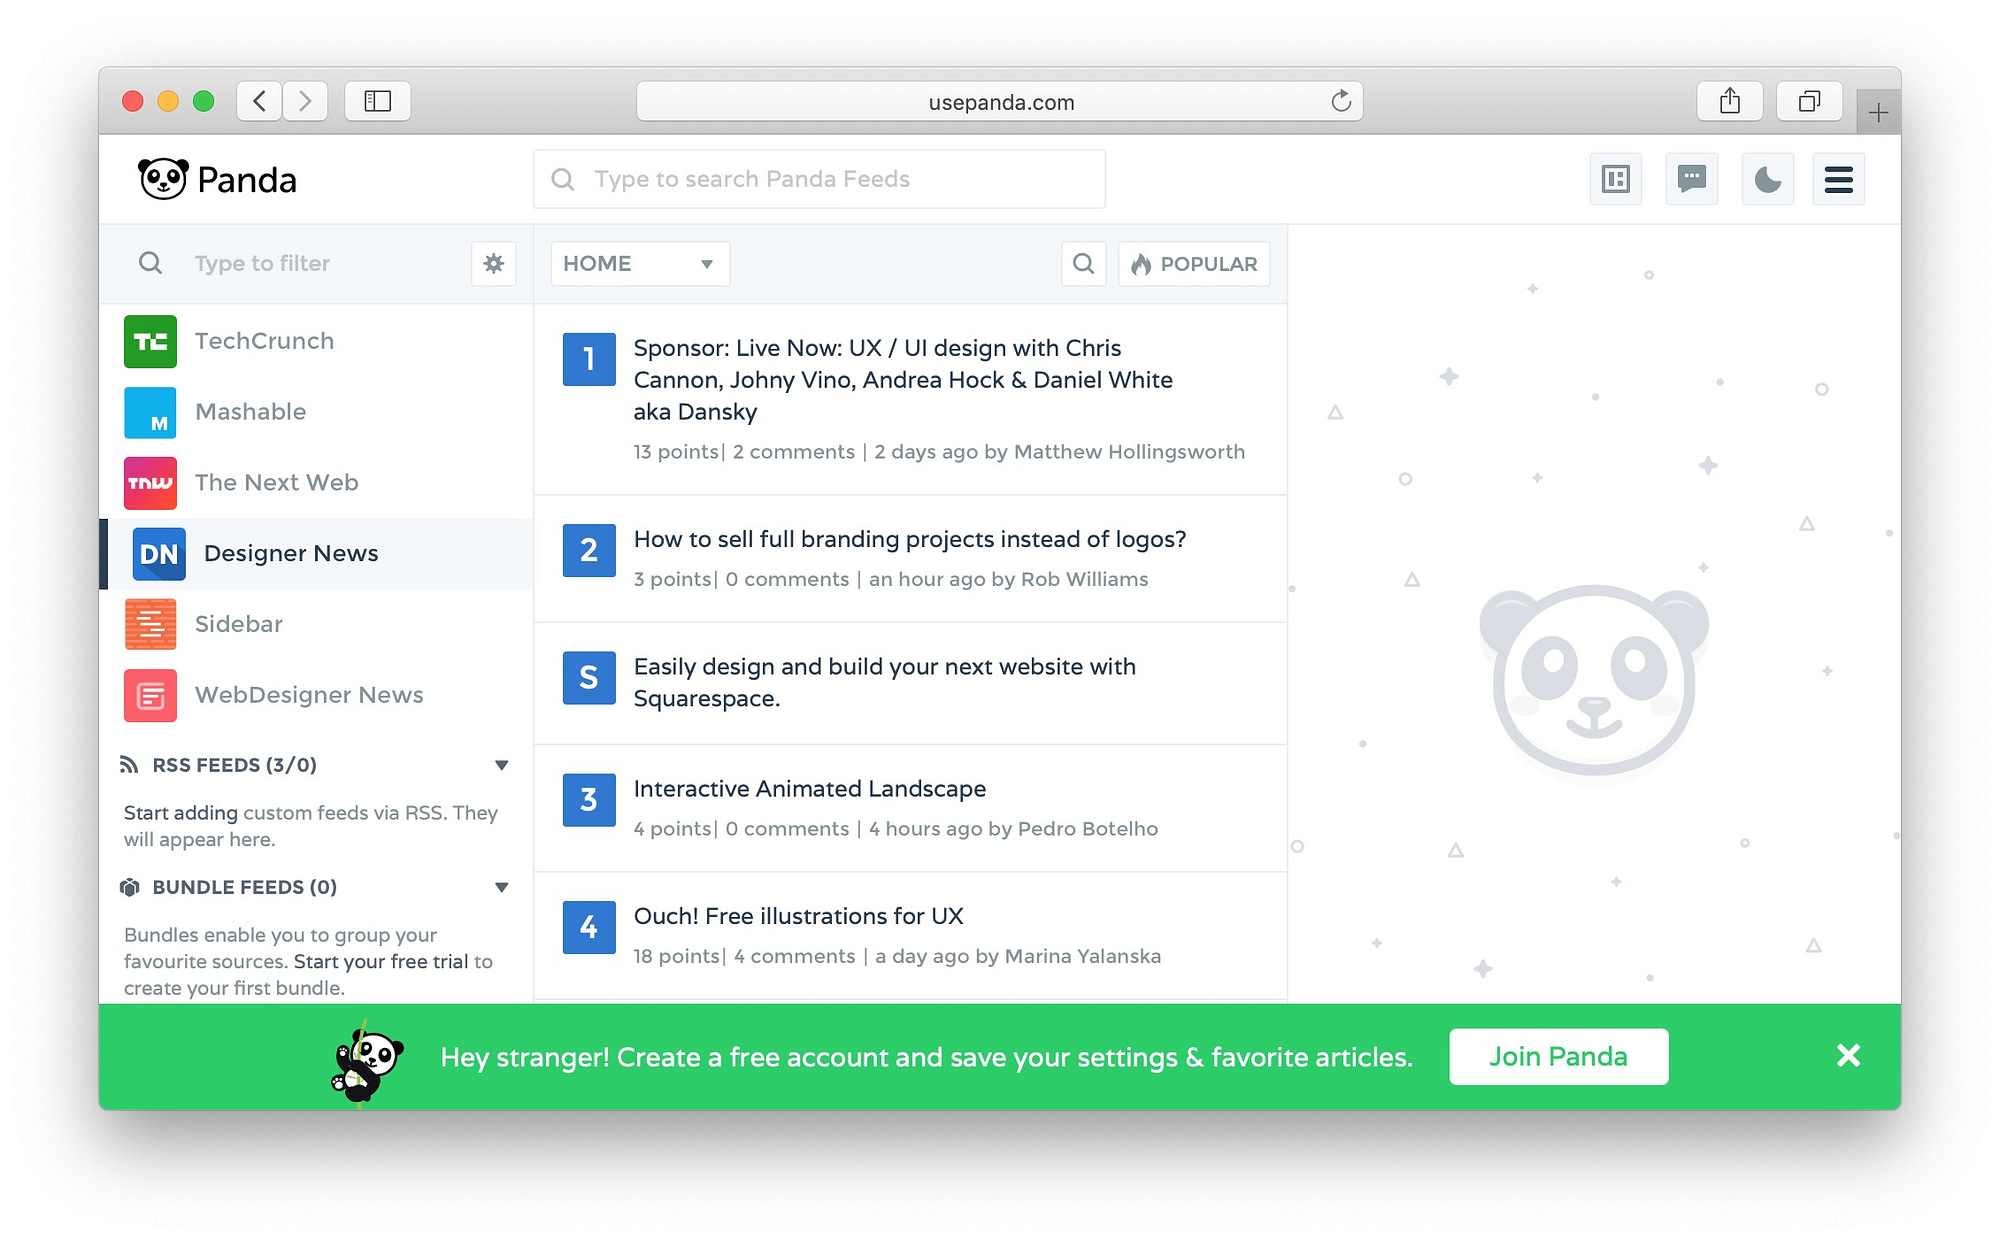 Panda is the best content aggregator service for designers, developers, and entrepreneurs